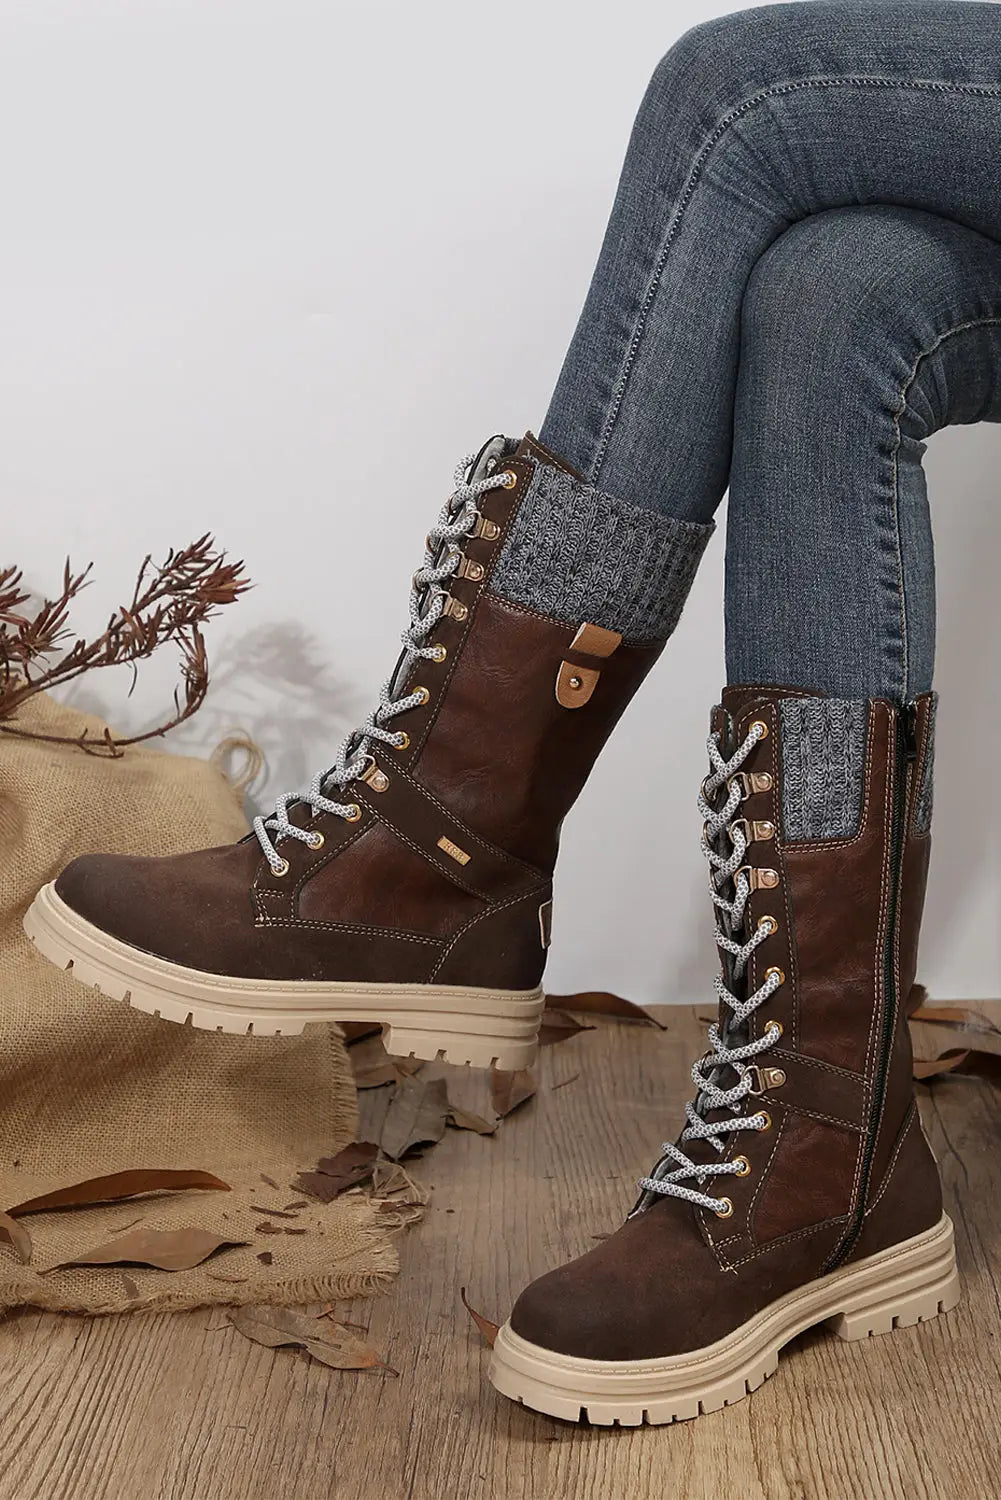 Coffee wool knit patchwork lace up leather boots - 37 / 100% polyester + 100% tpr